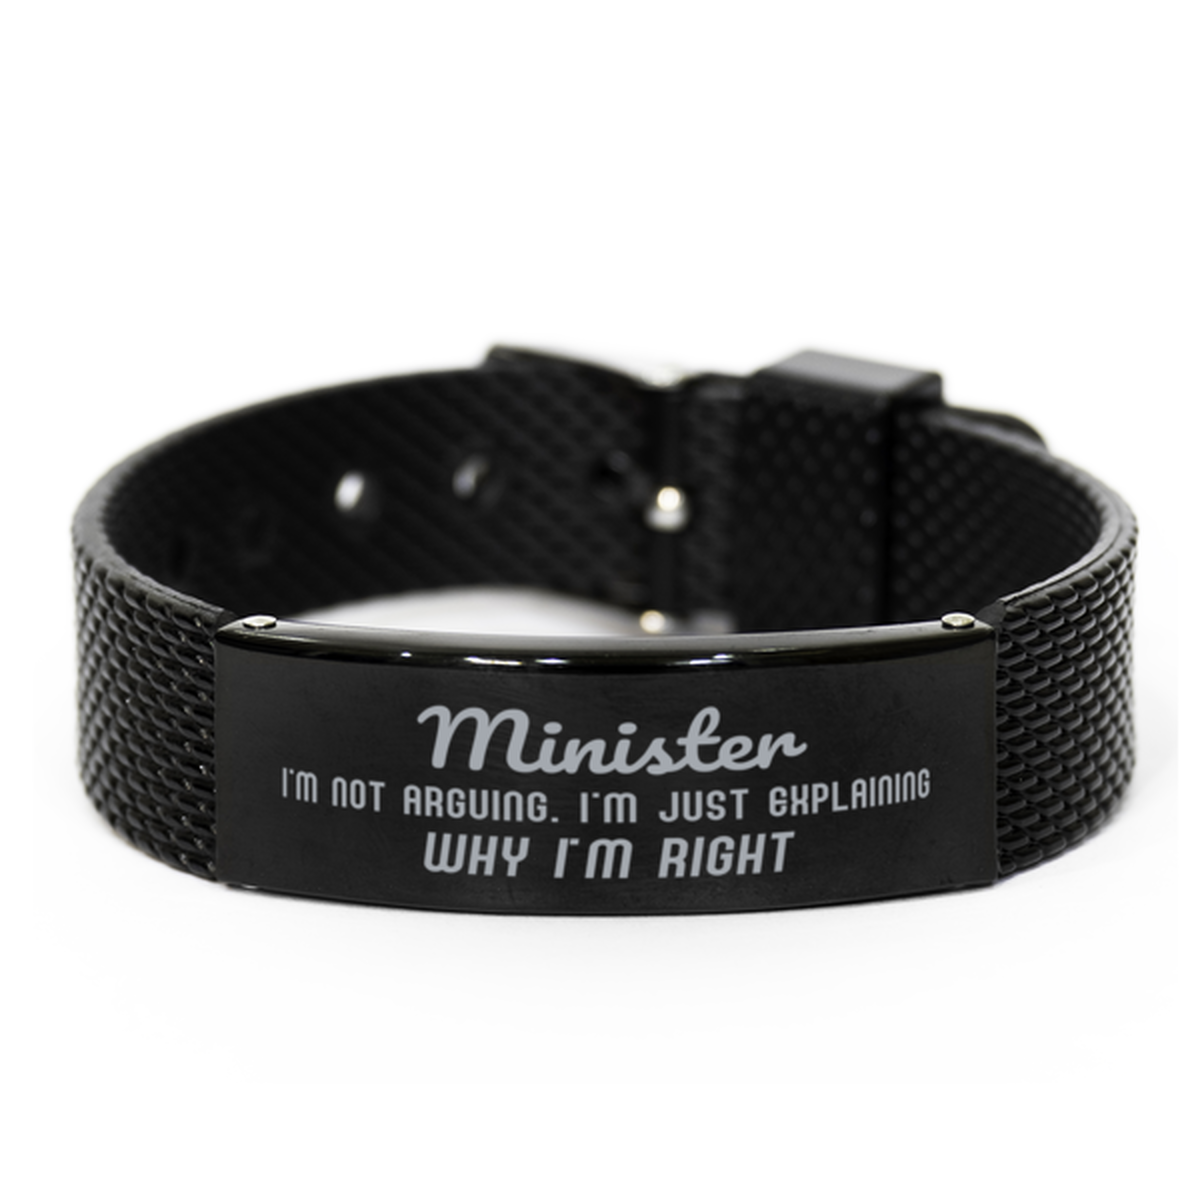 Minister I'm not Arguing. I'm Just Explaining Why I'm RIGHT Black Shark Mesh Bracelet, Funny Saying Quote Minister Gifts For Minister Graduation Birthday Christmas Gifts for Men Women Coworker